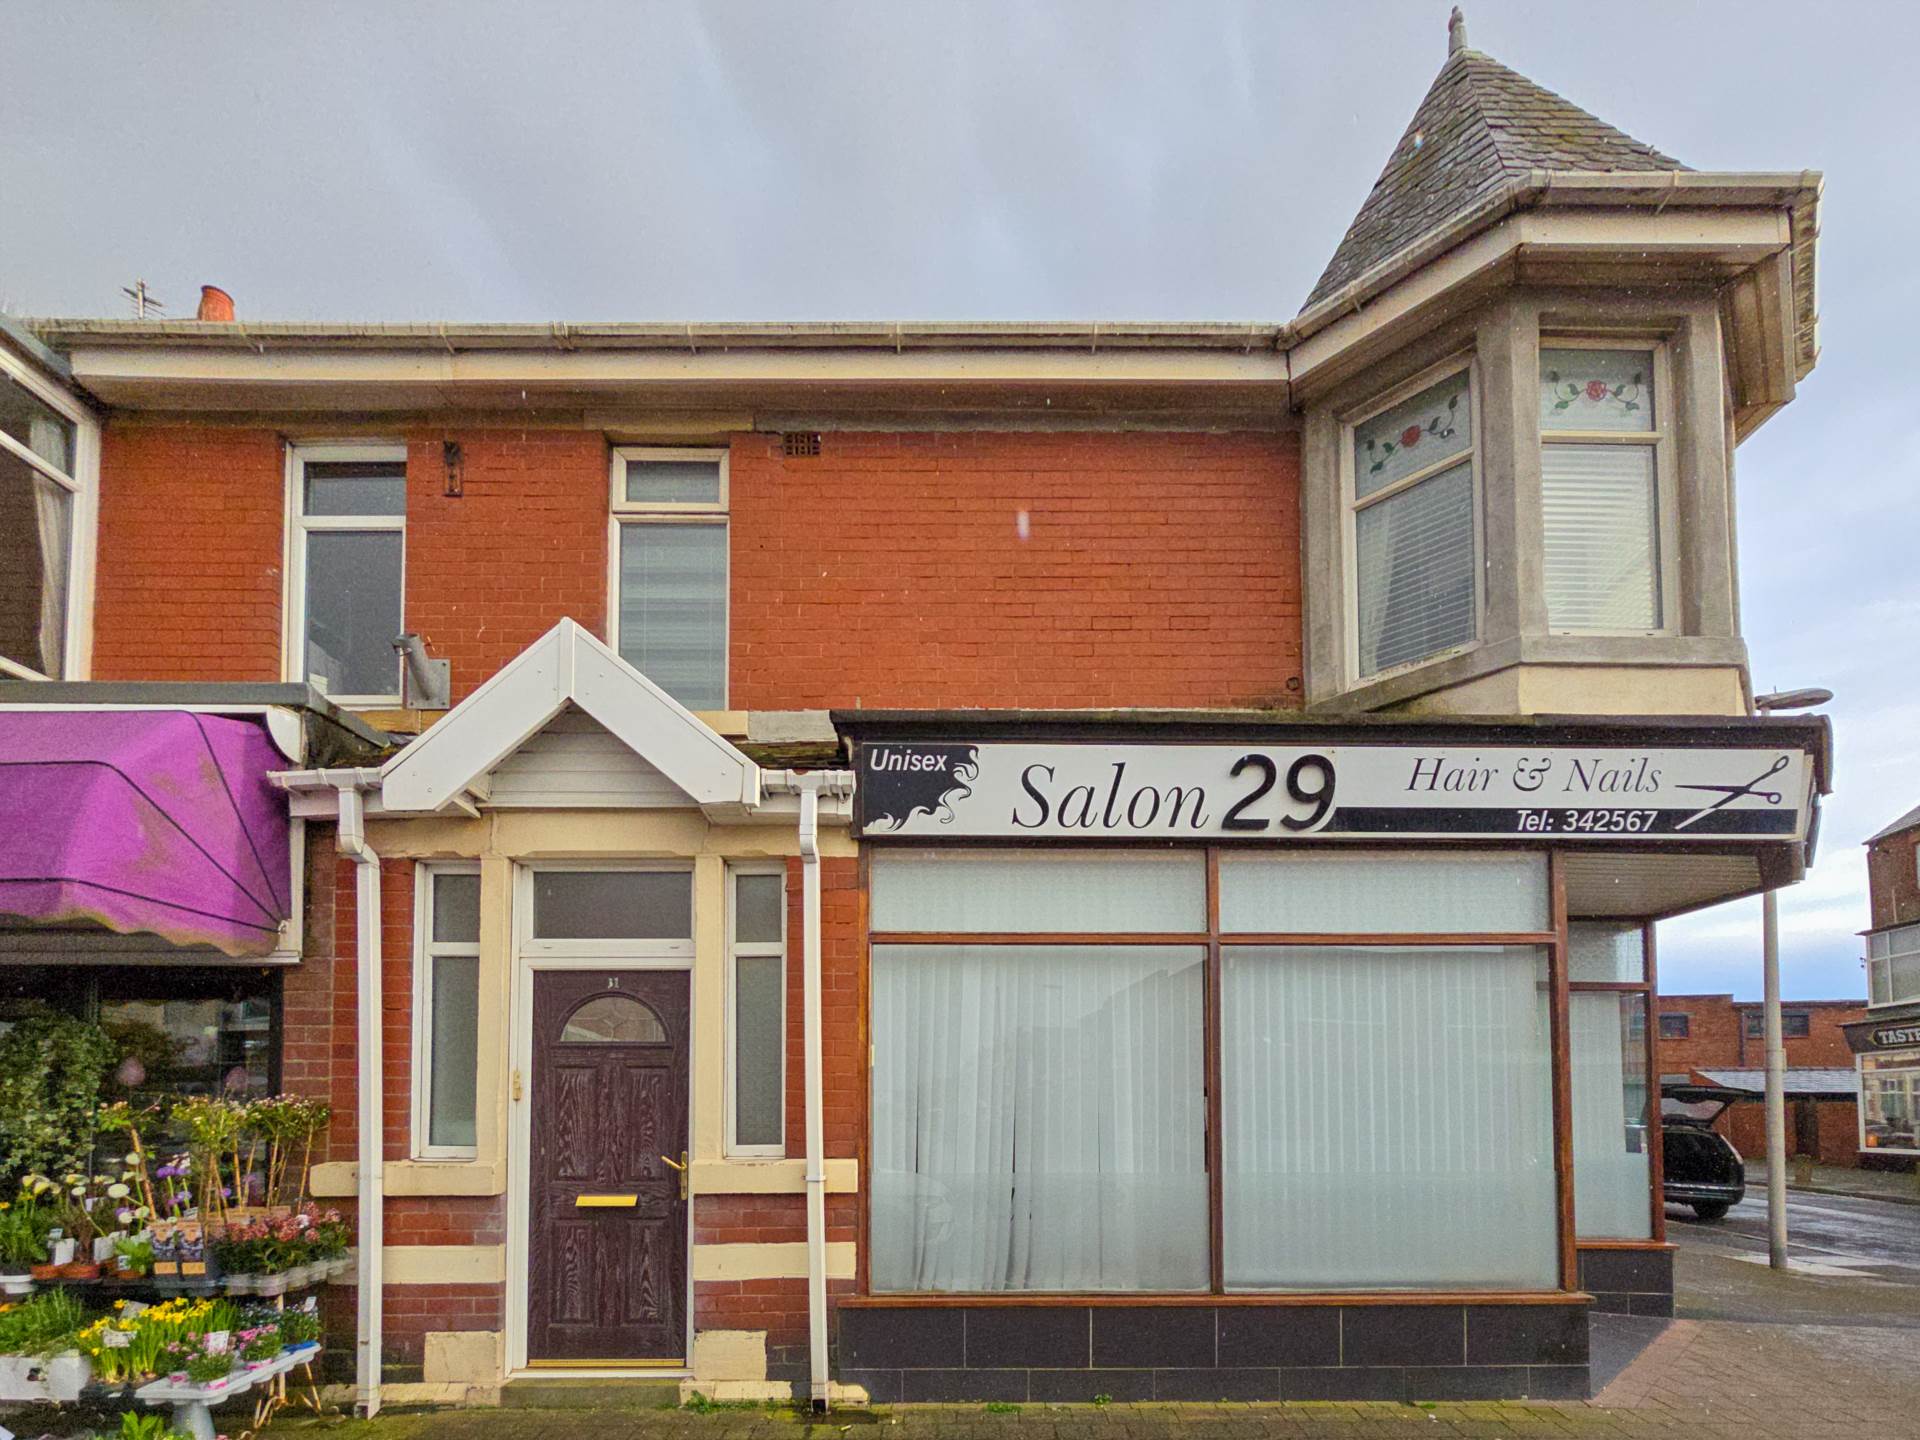 2 bed Flat for rent in Blackpool. From DY Property Services